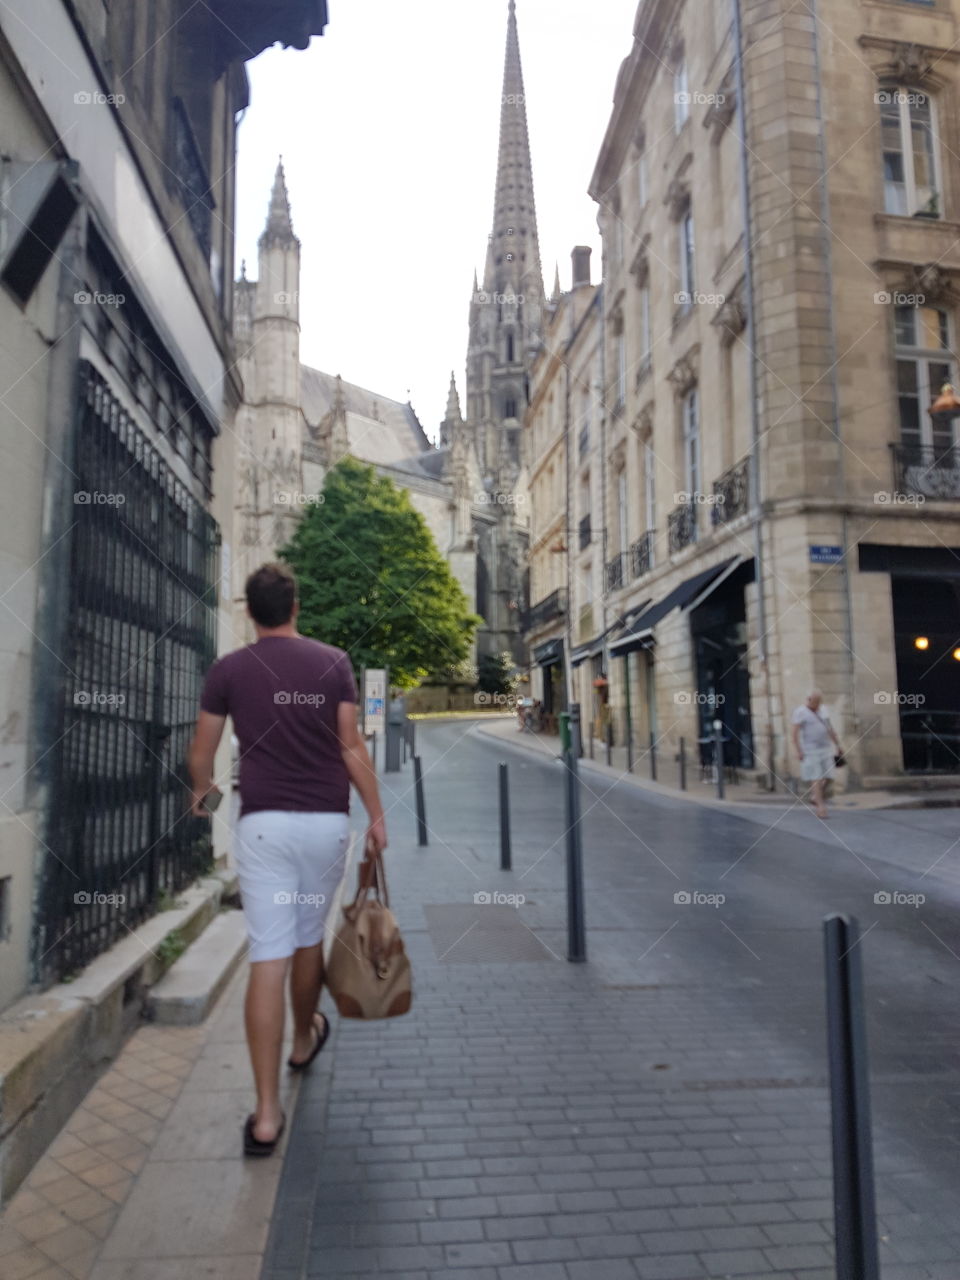 man carrying luxury bag in Bordeaux, France.